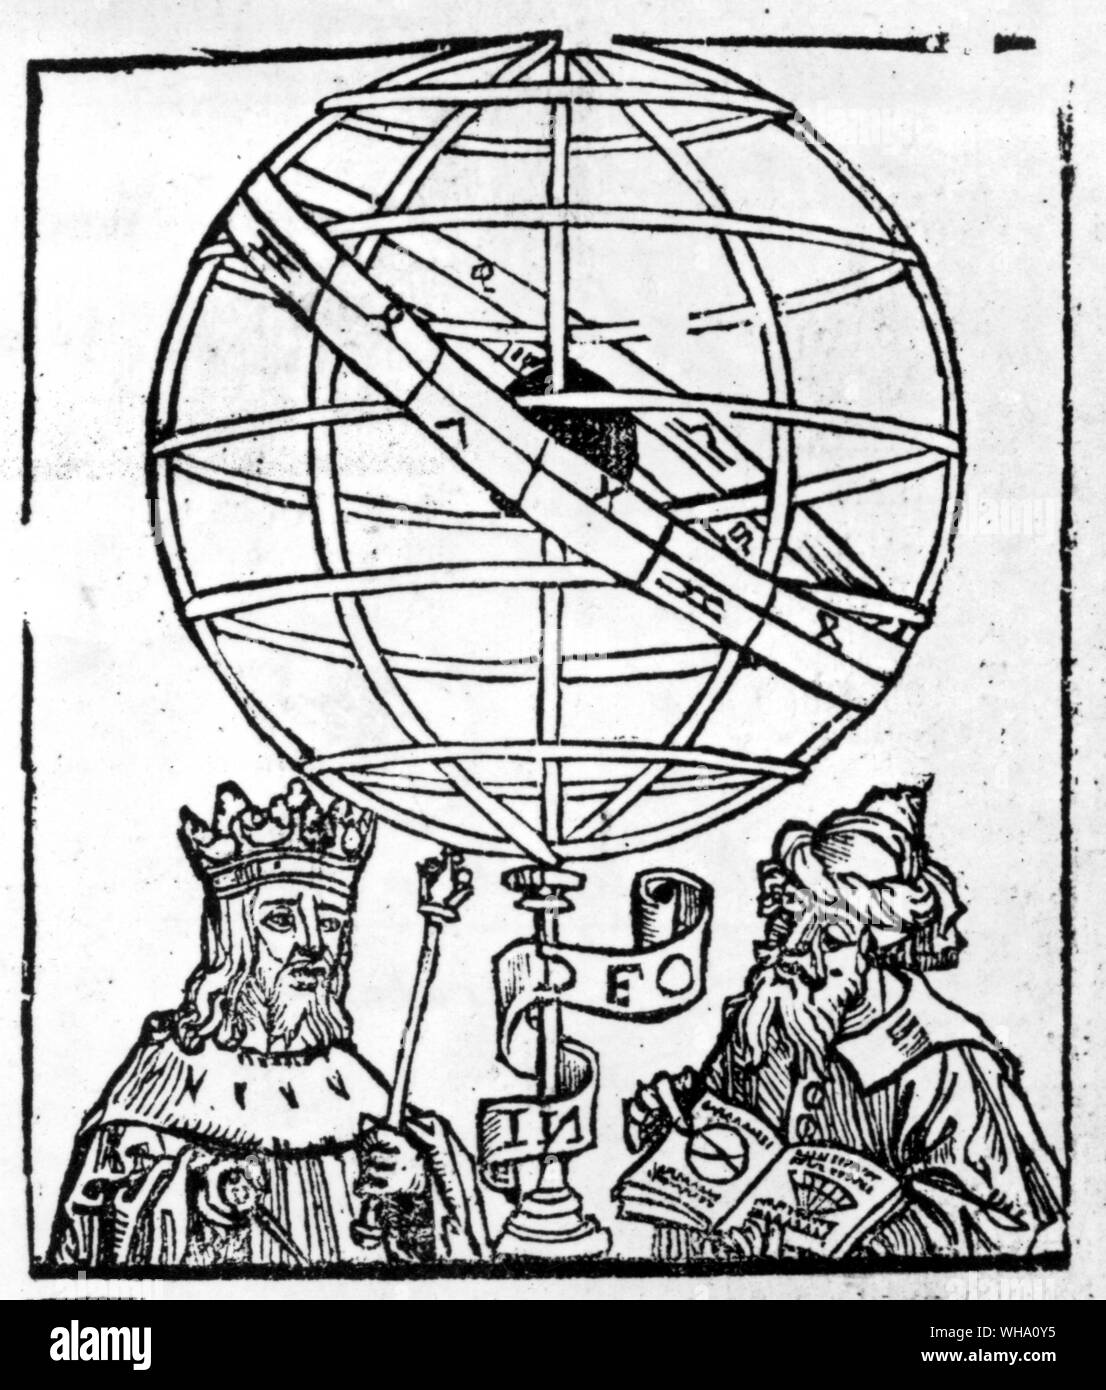 Frontispiece from Sacrobosco's Treatise of the Sphere - Reliable information about the life of Johannes de Sacrobosco is scarce, and standard sources such as the Dictionary of Scientific Biography have unfortunately included as fact material deriving from the speculations and inventions of sixteenth- and seventeenth-century antiquarians. On the basis of a statement made in 1271 by his commentator Robertus Anglicus, he is believed to have been of English origin; his name is frequently anglicised as John of Holywood. At some time in the earlier part of the thirteenth century (according to a Stock Photo